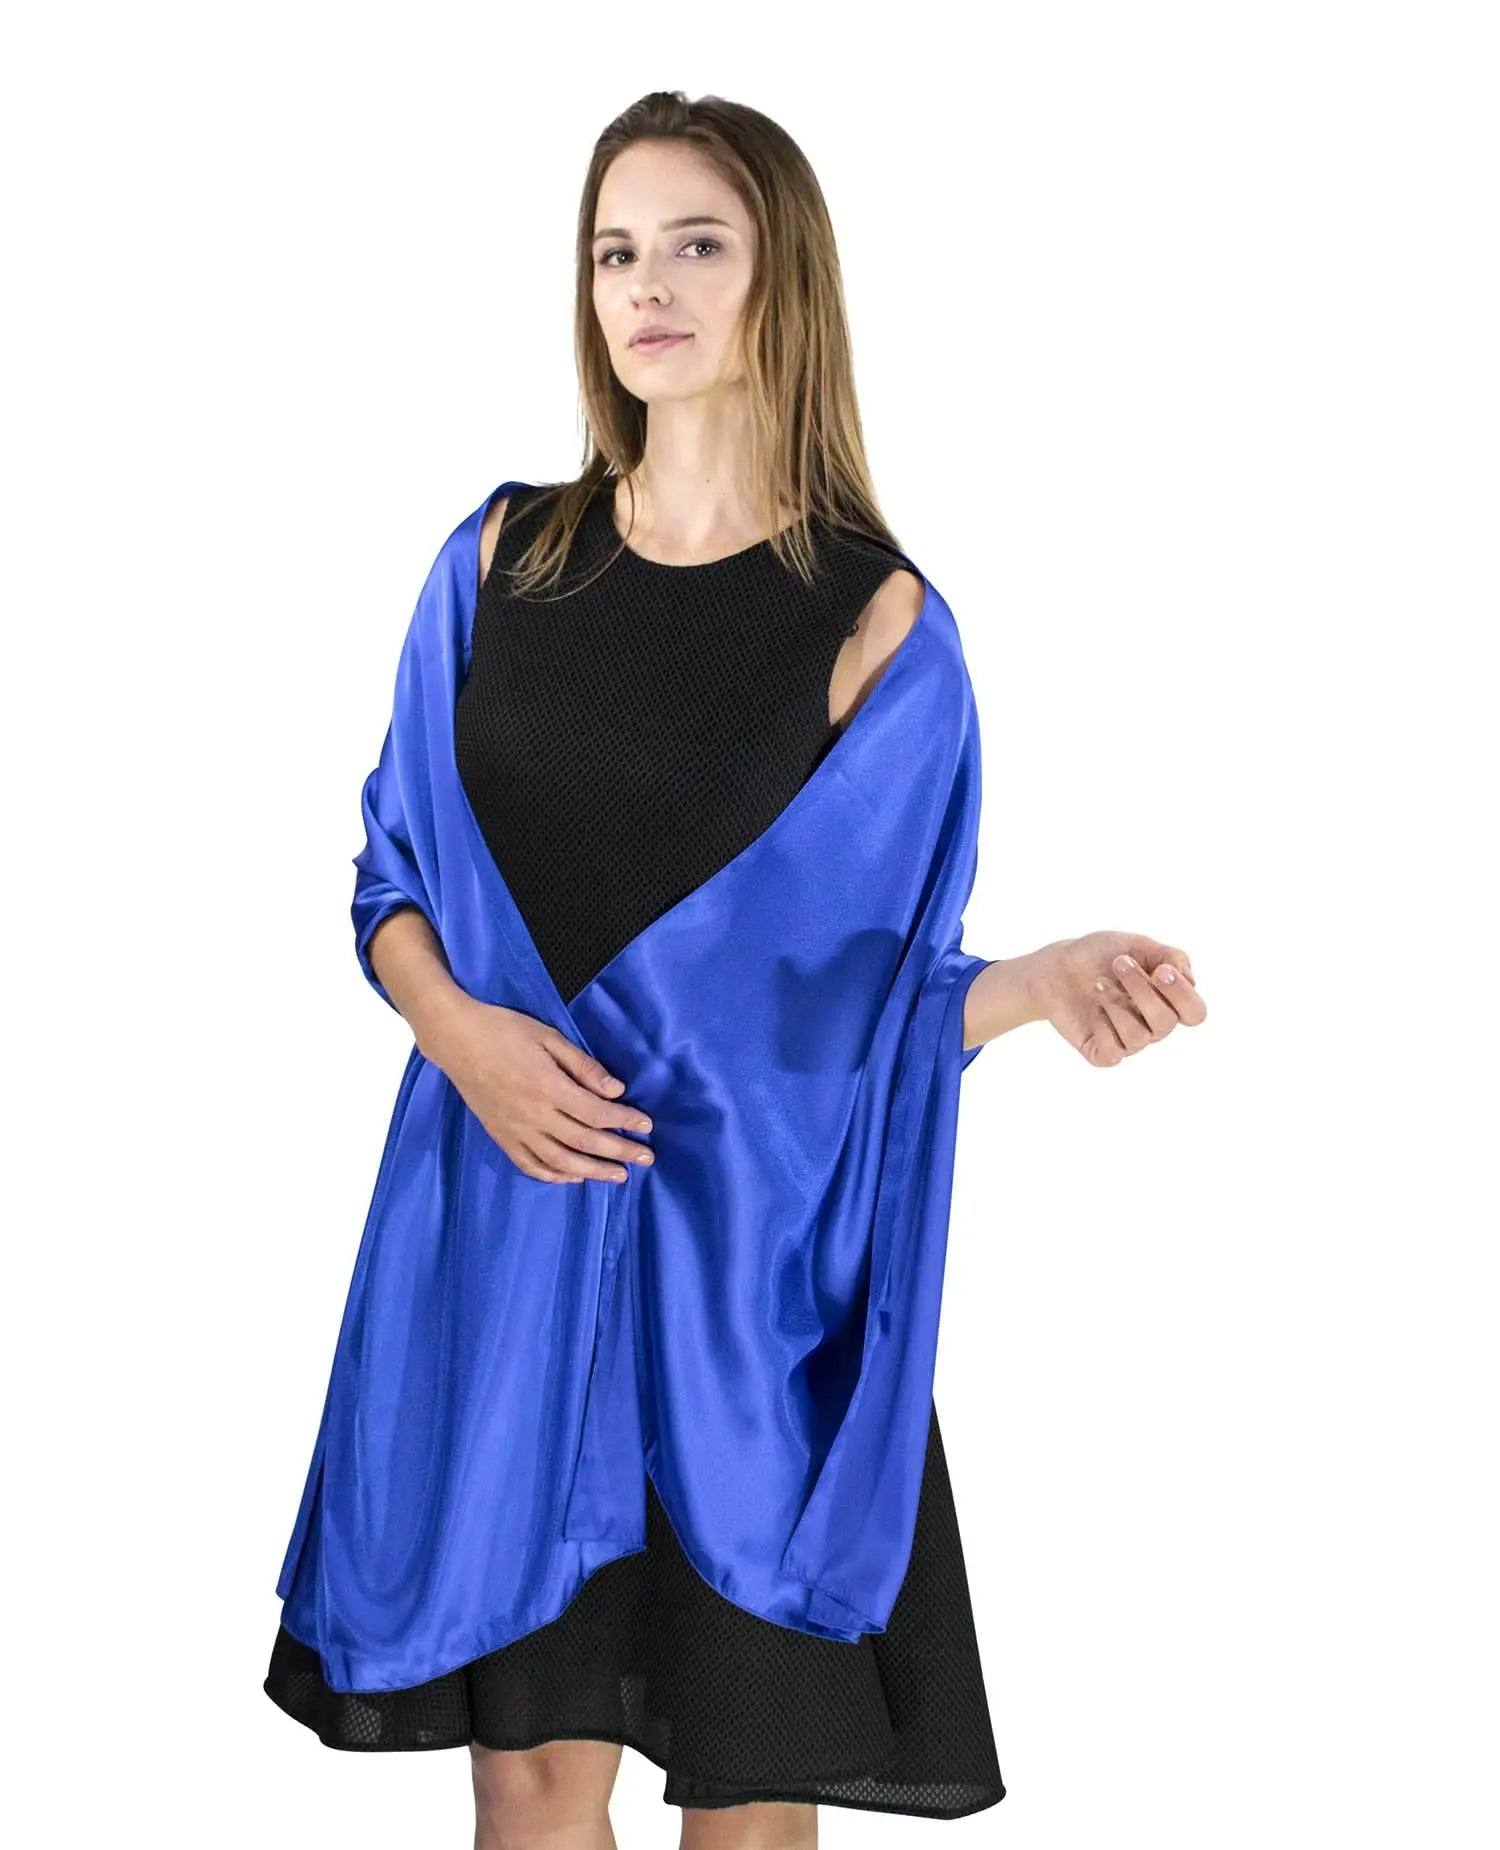 Elegant satin evening shawl in blue and black worn by a woman.